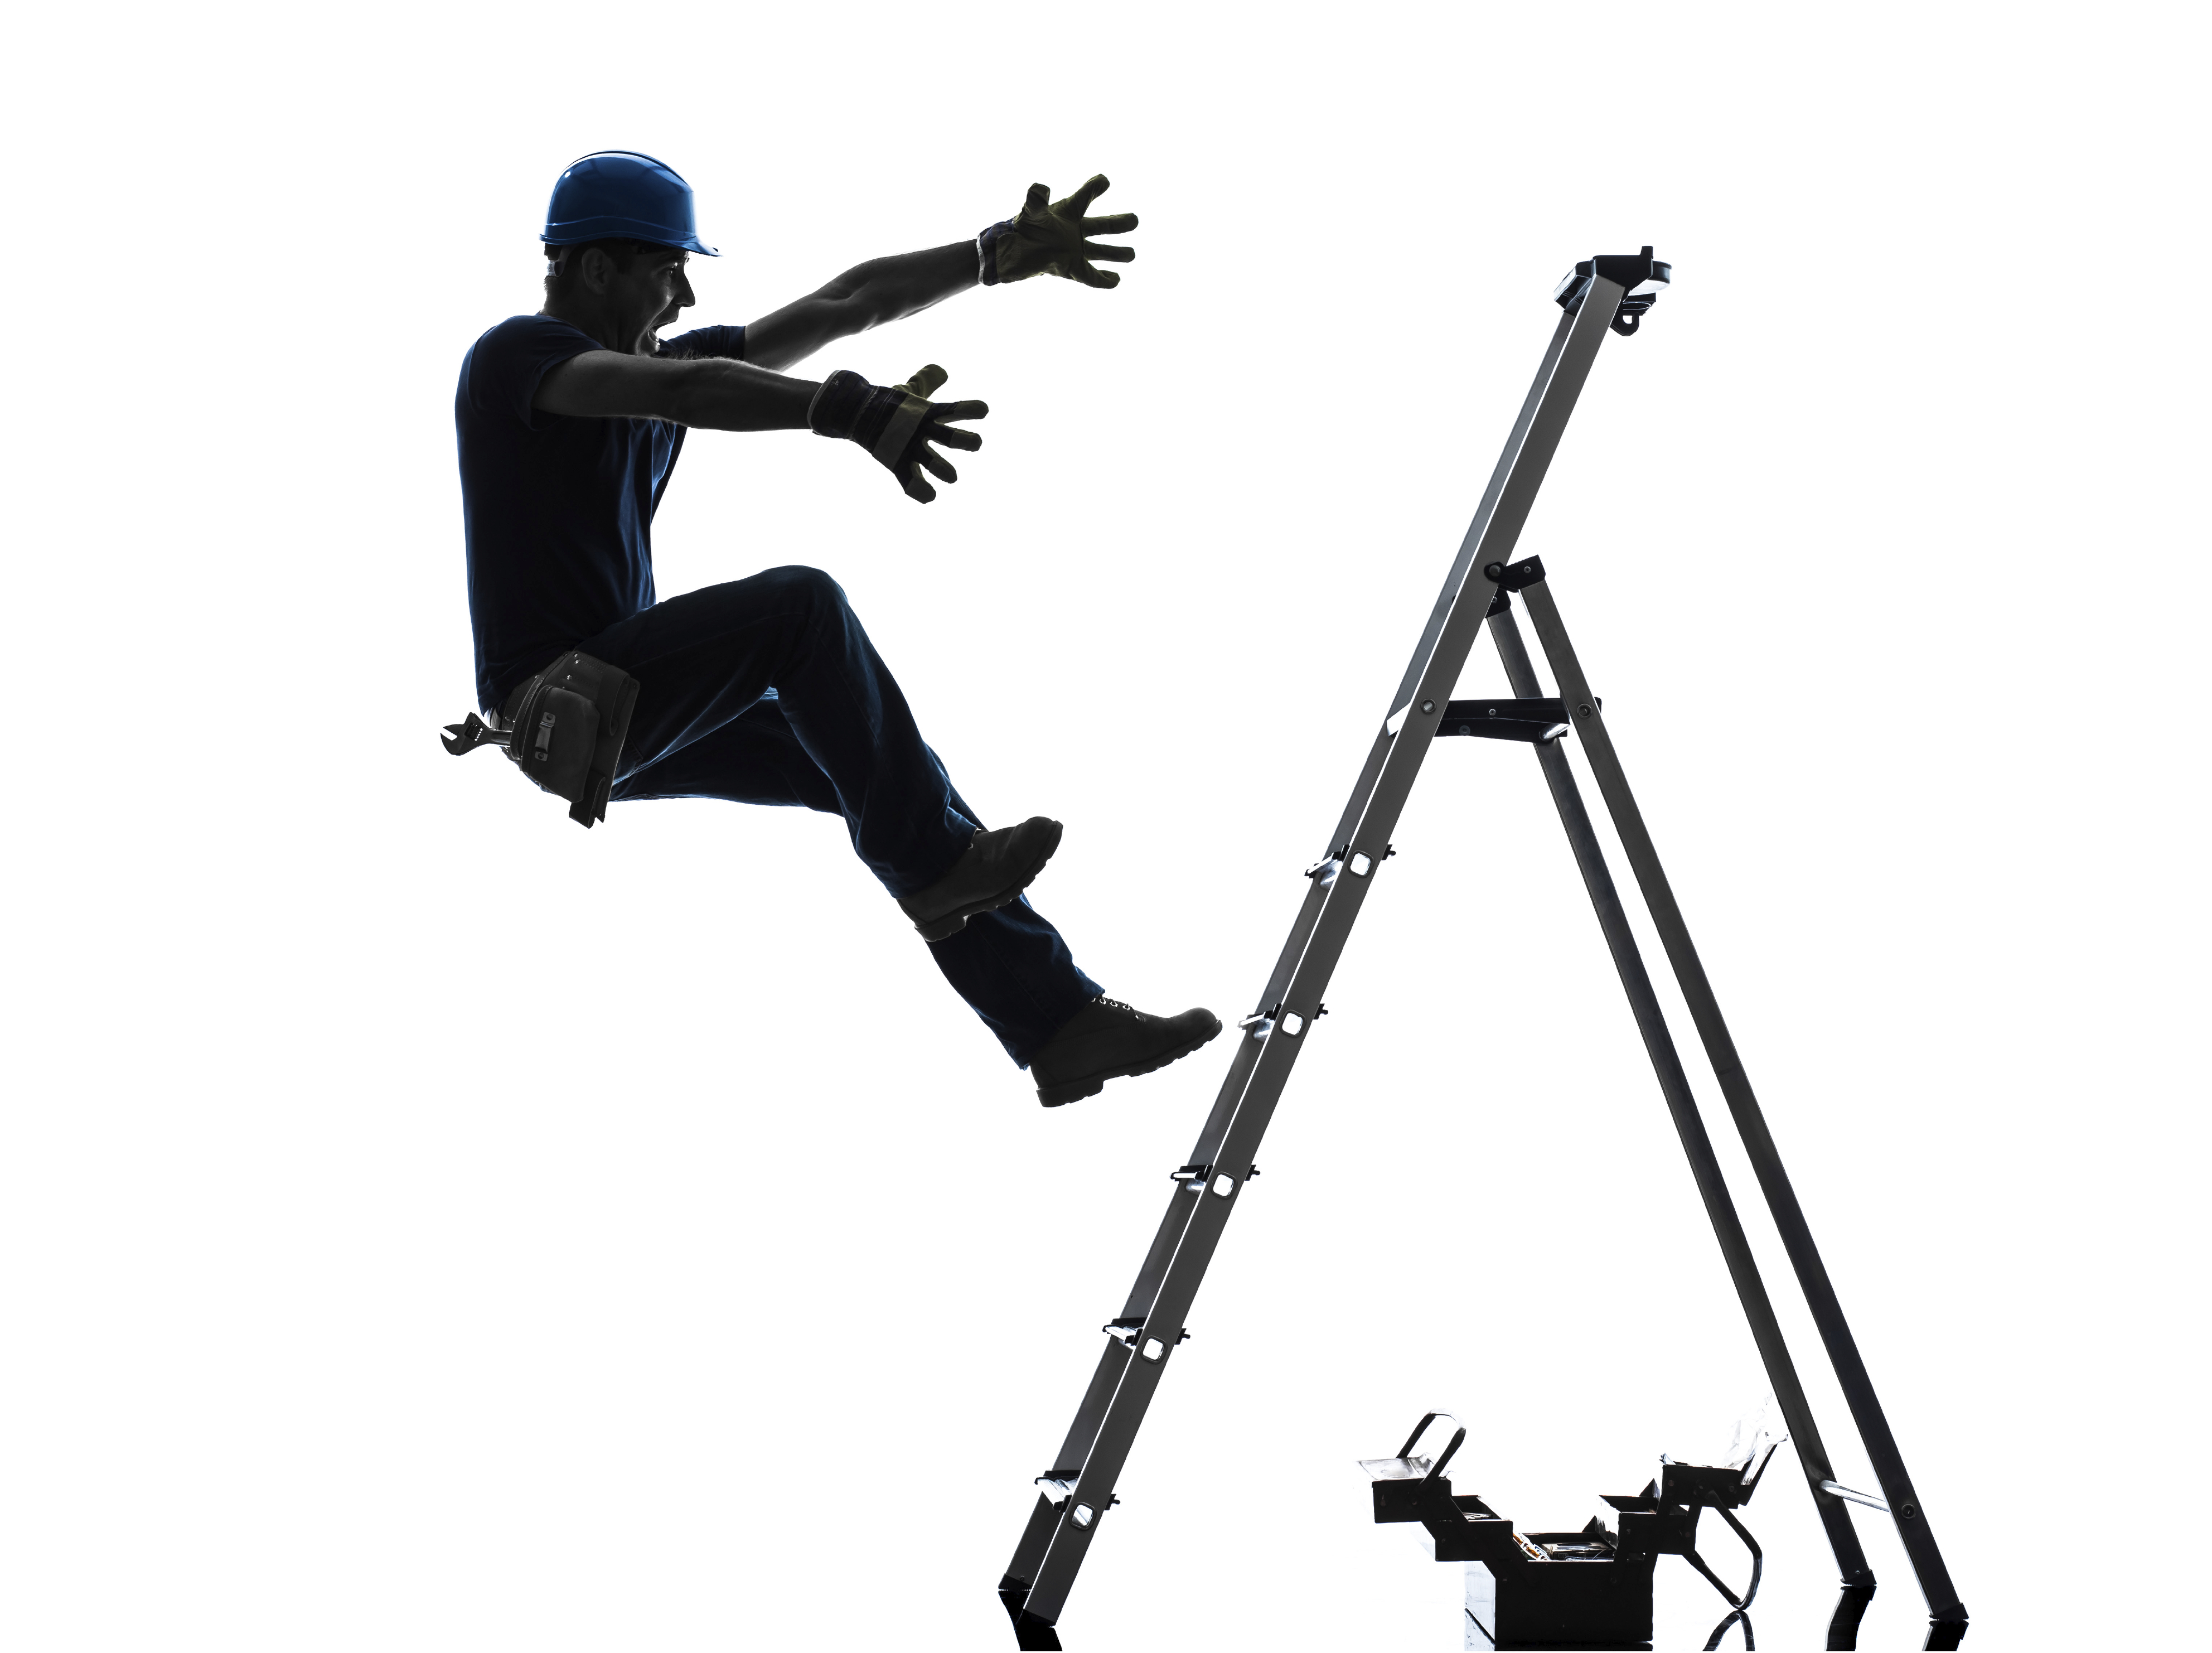 Who's at ladder fall risk? – ladder climbing, physical ability and